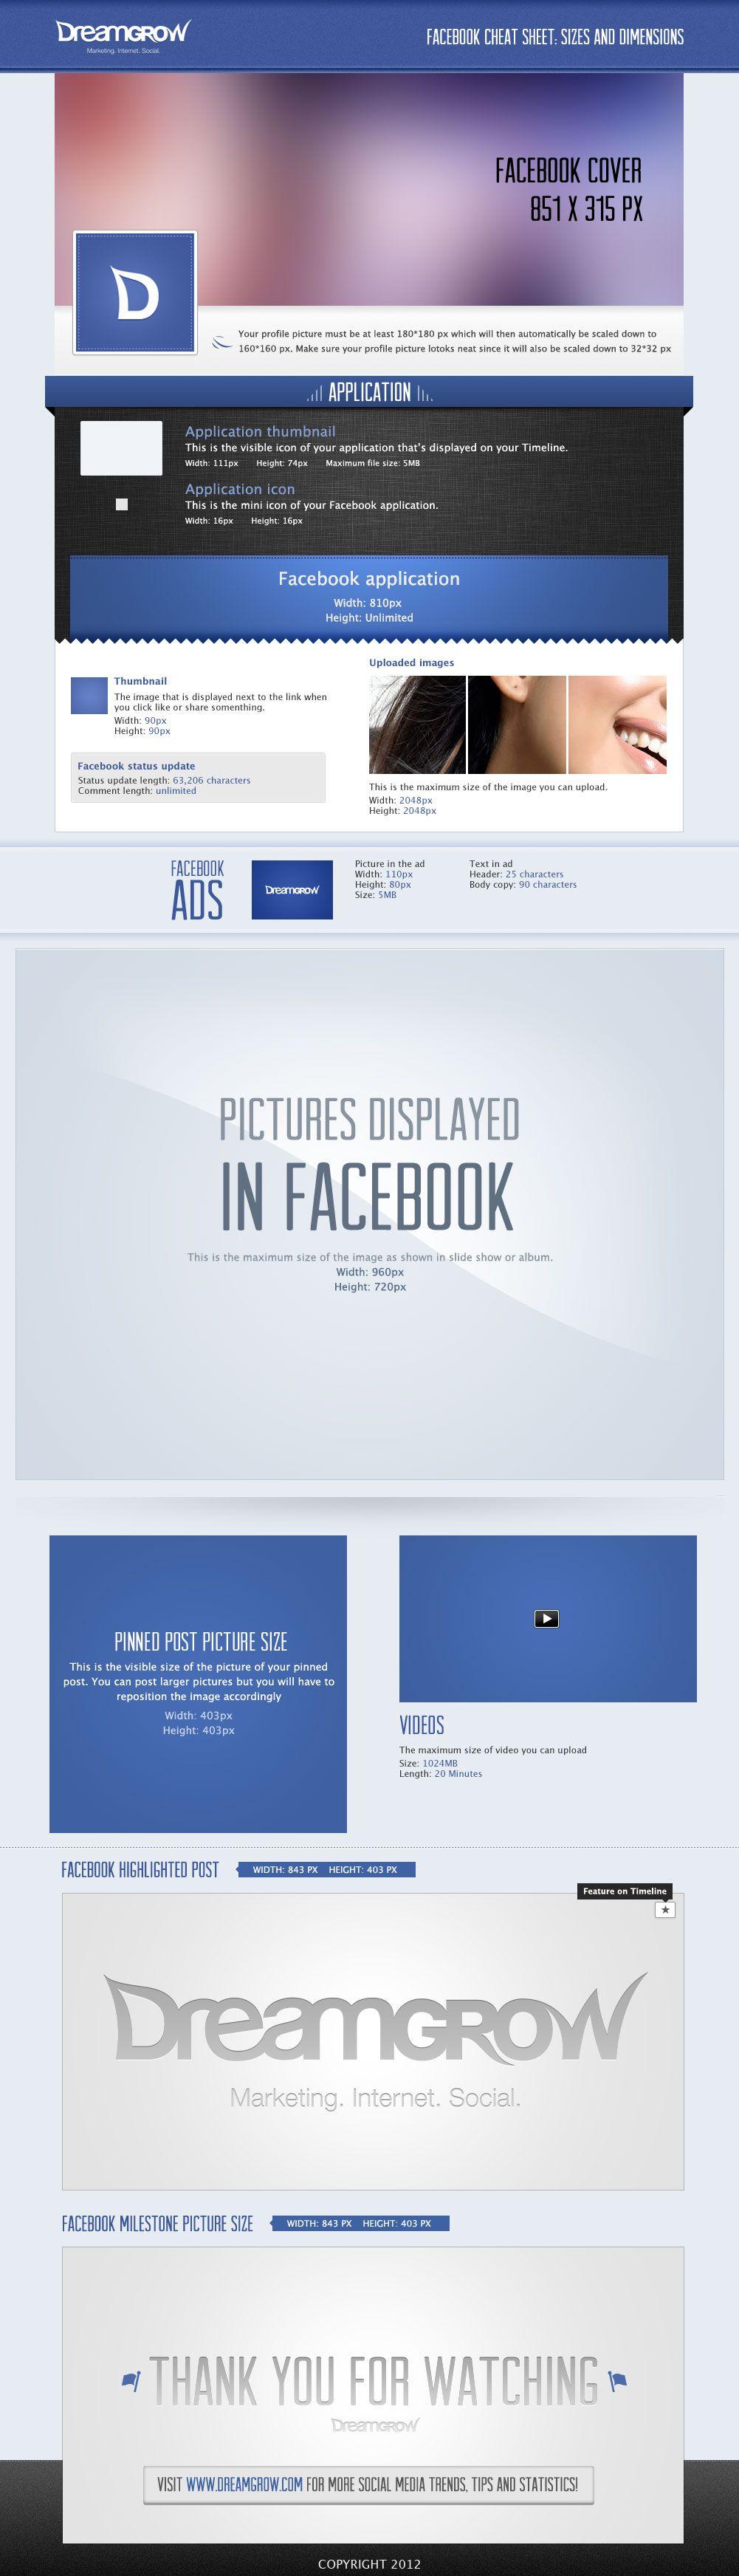 Facebook Mini Logo - Facebook Cheat Sheet: All Sizes and Dimensions 2018 @DreamGrow 2018